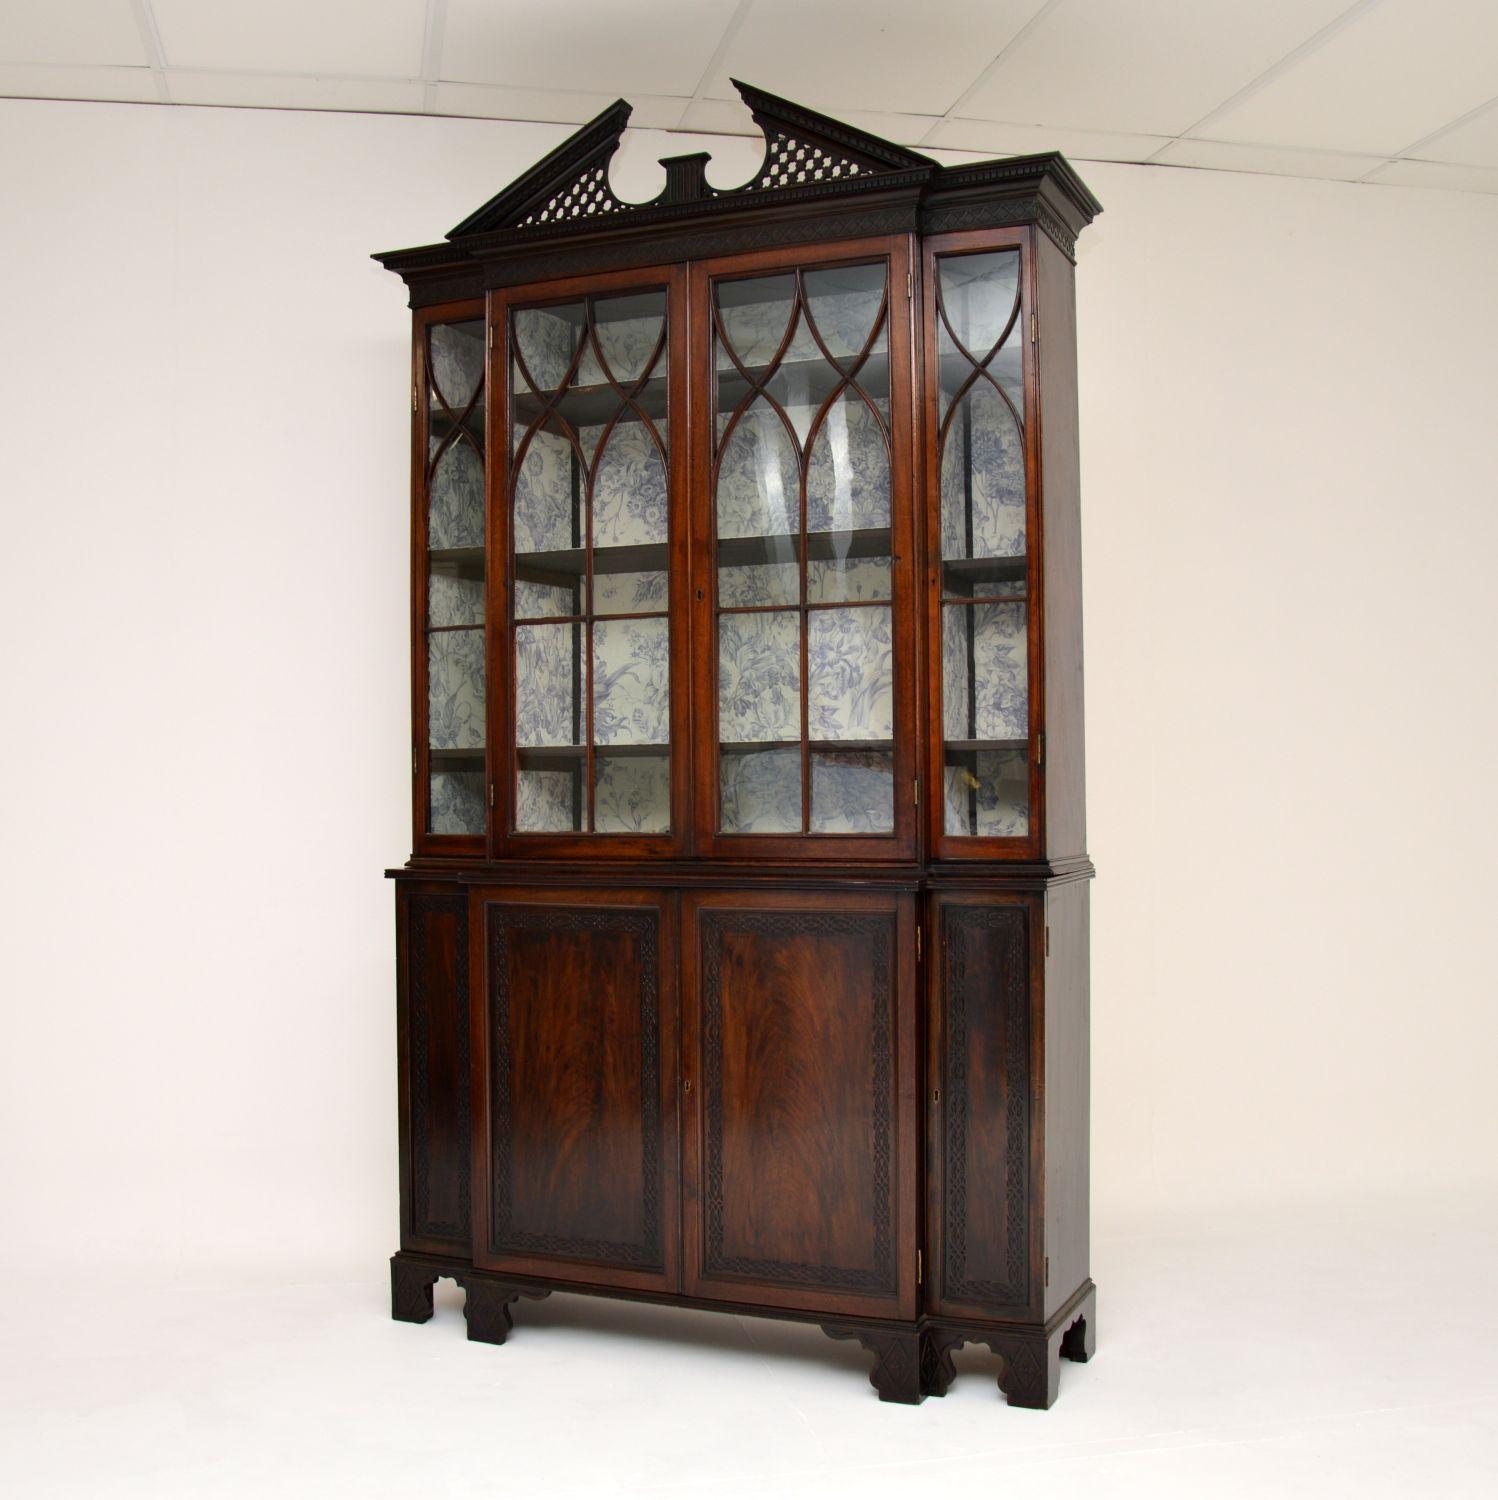 A beautiful and very impressive antique breakfront bookcase. This was made in England, it dates from around the 1880-1900 period.

It is of superb quality and has lovely proportions. It is large and impressive, yet elegant with refined features. The